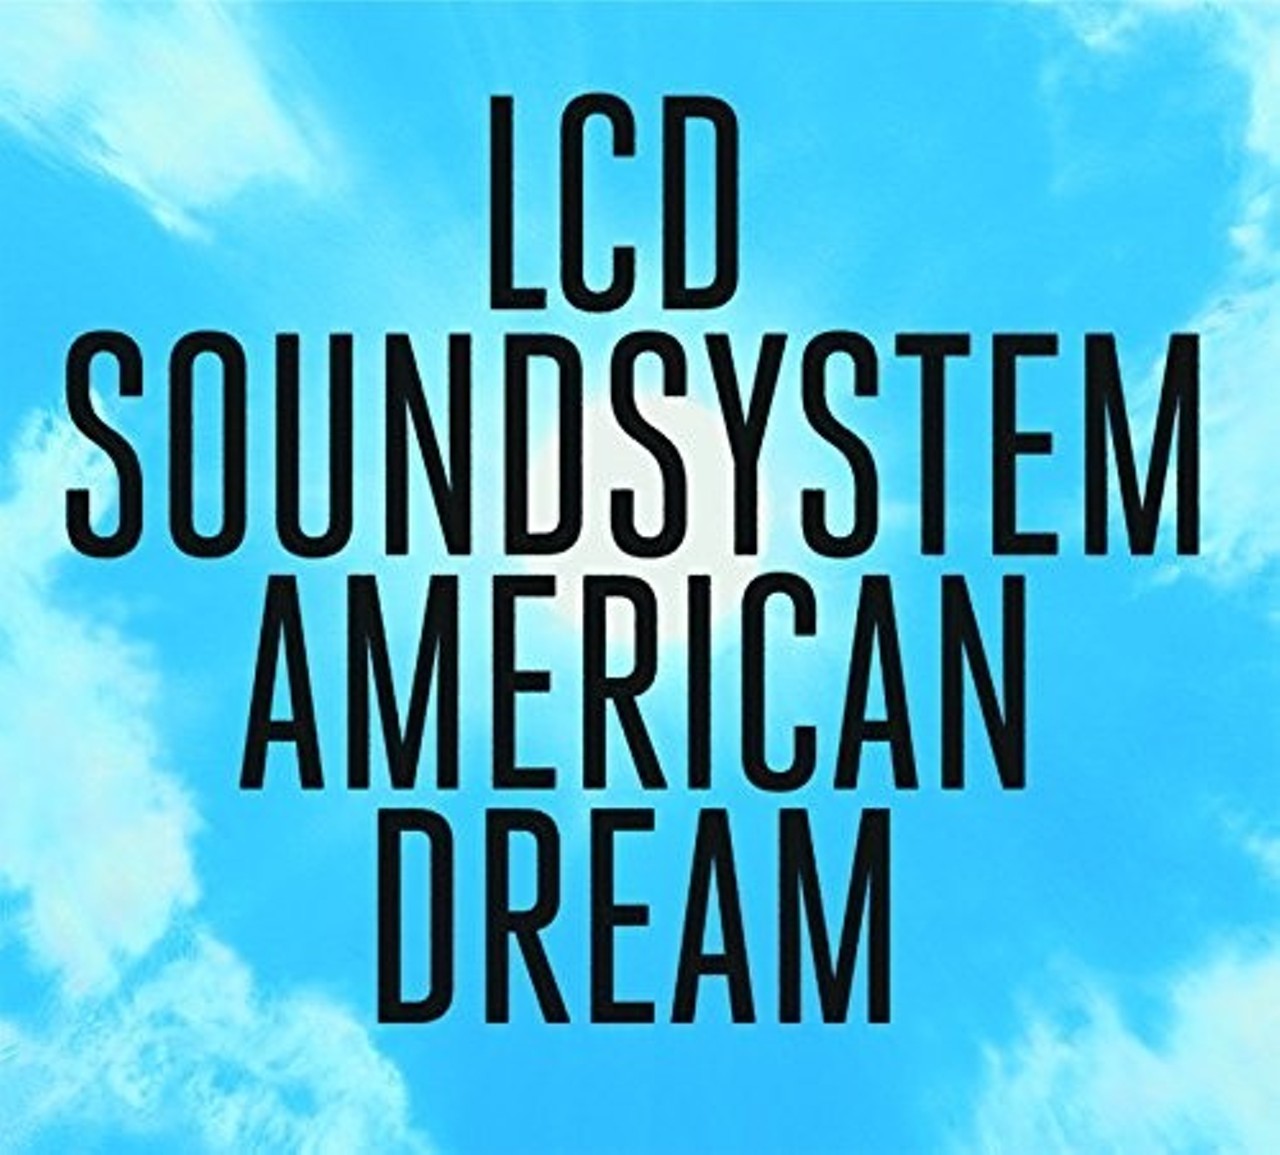 5. LCD Soundsystem | American Dream
"The Talking Heads of the touch-screen generation" shook-off their rumored retirement and returned to eulogize crumbling ideals shrouded in a synth-ony of danceable terror. Frontman James Murphy reprises his roles as the cool guy and the asshole, and in doing so delivers the most reverent performance of the band's career. Of all the musical commentaries released in 2017 regarding the state of the world, politics, and the growing disconnect between people, their peers, and devices, American Dream is the most urgent and, in many ways, the most uncomfortable.
Listen to: "How Do You Sleep?"
Put this lyric on your headstone: "I never realized these artists thought so much about dying/ But truth be told we all have the same end/ Could make you cry, cry, cry, cry, cry/ But I'm telling you/ This is the best news you're getting all week."